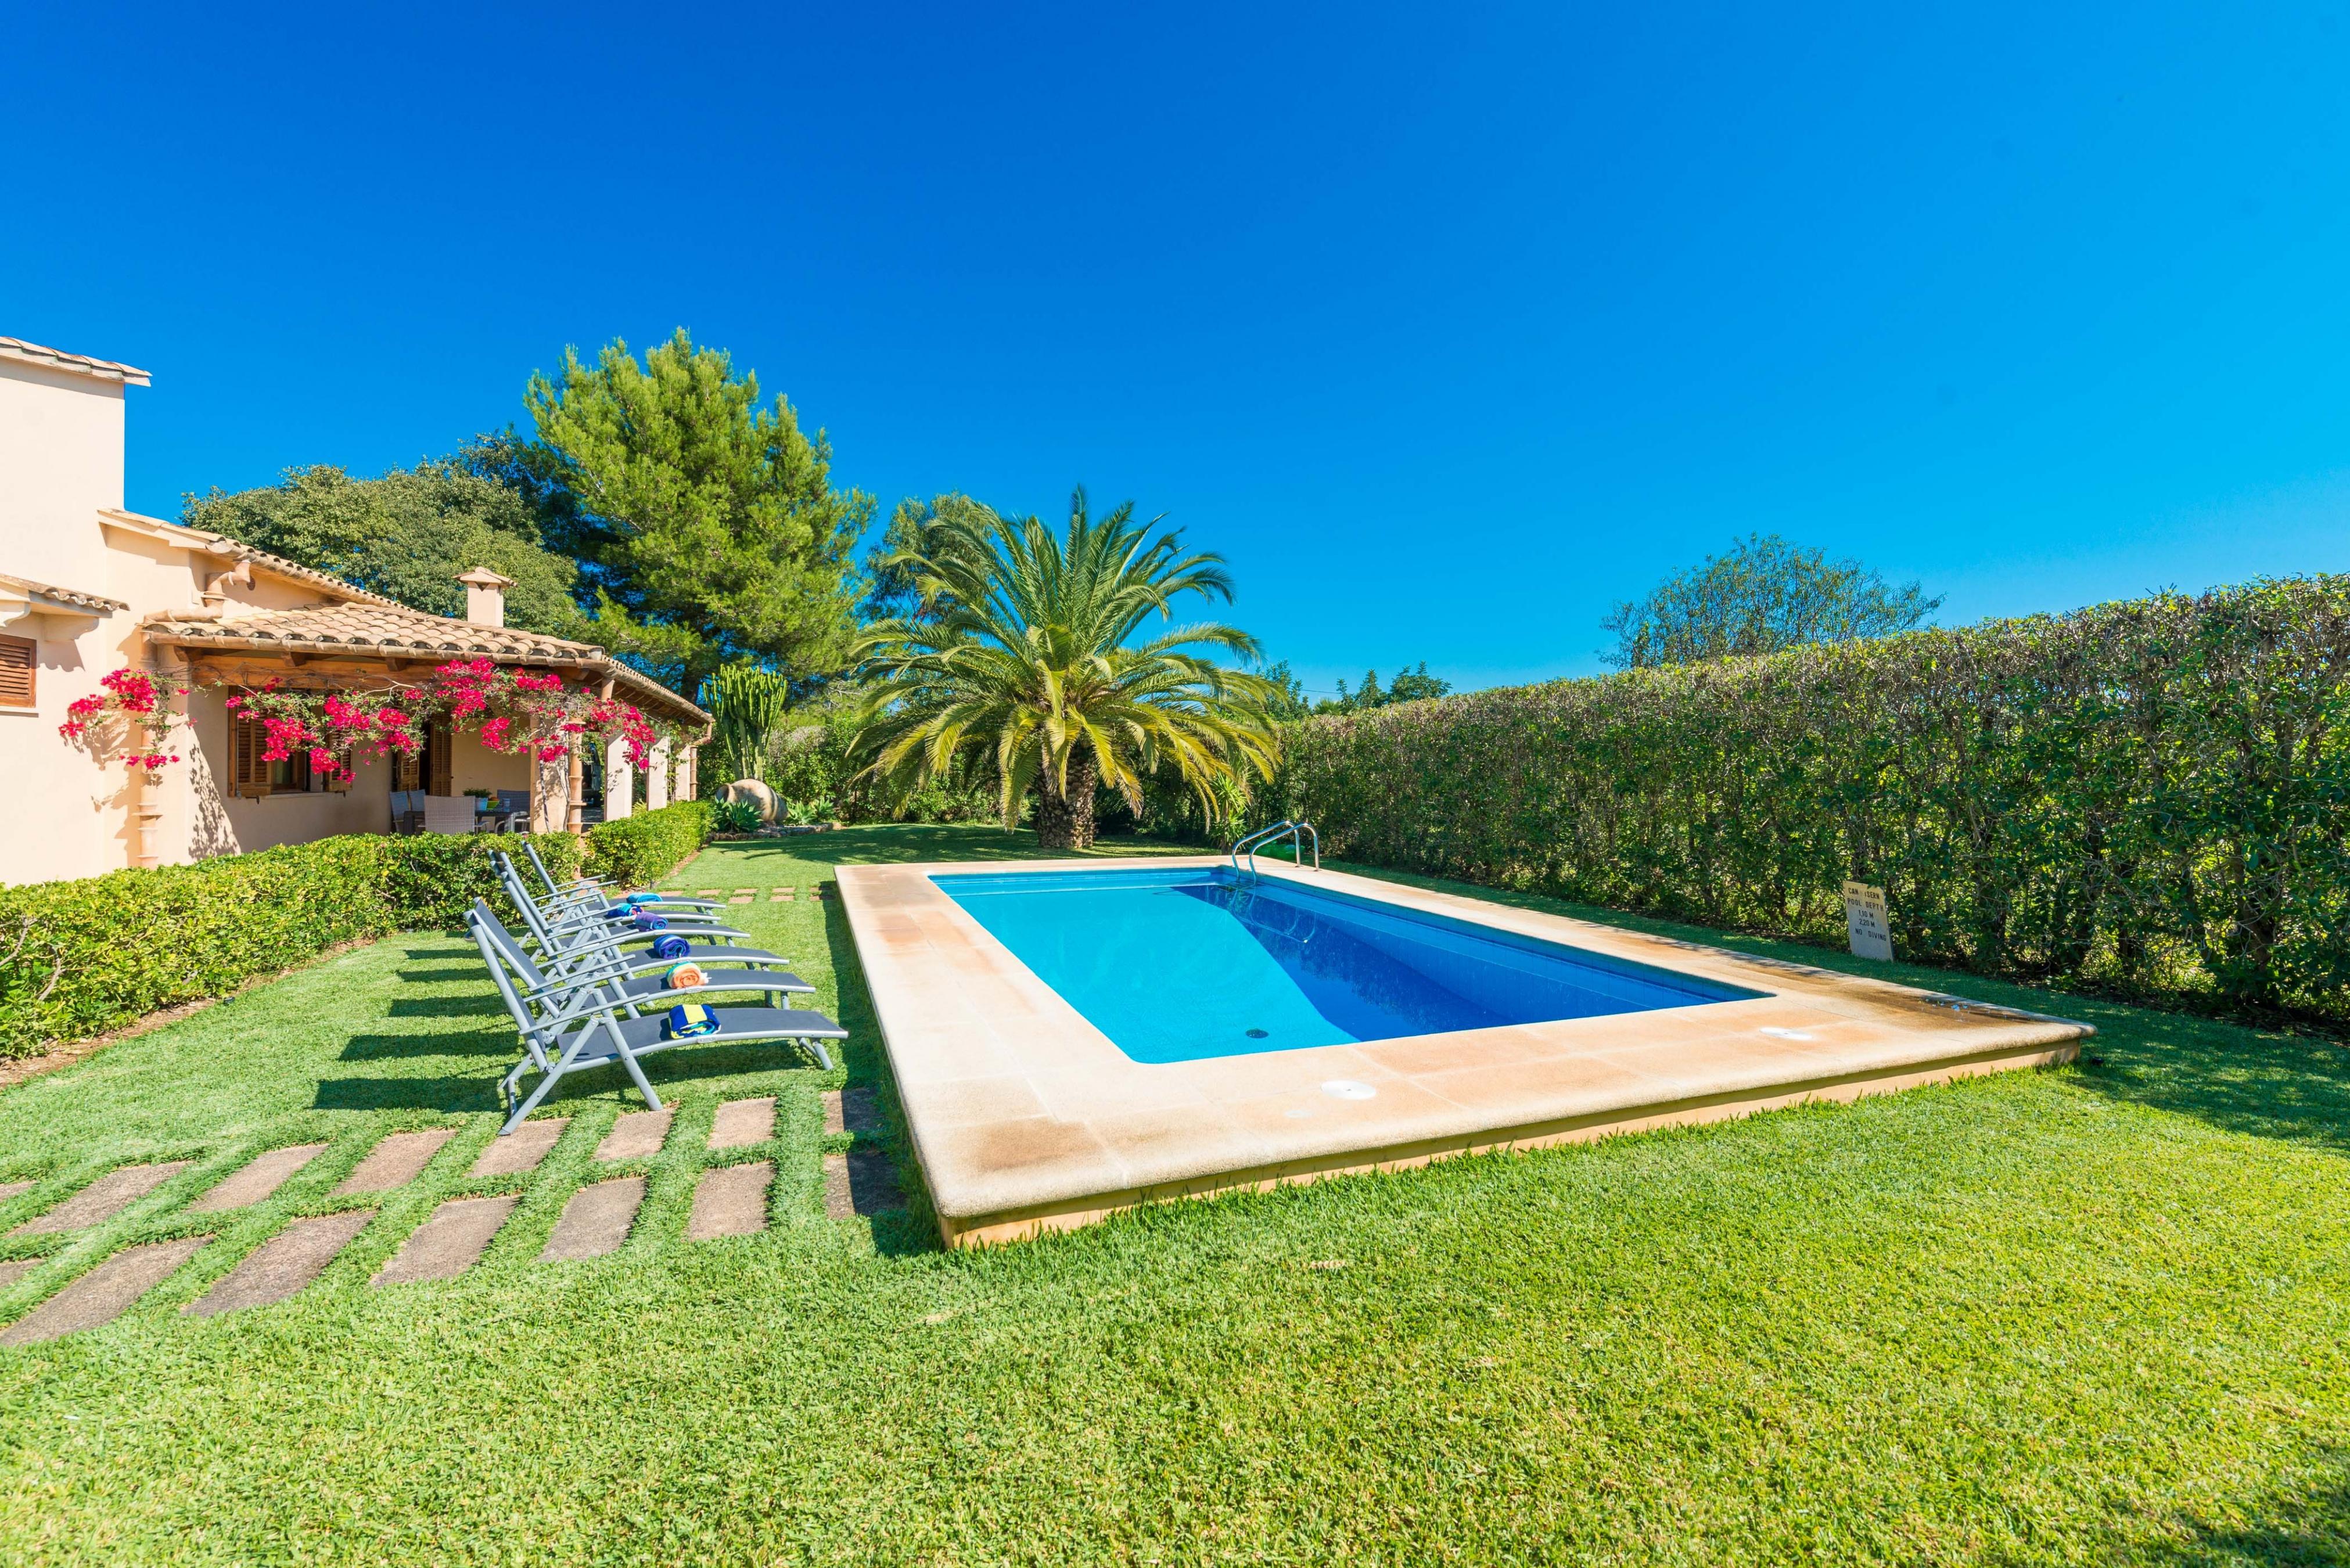 Property Image 2 - CASA DANIELA - Great country house with beautiful garden and private pool. Free WiFi